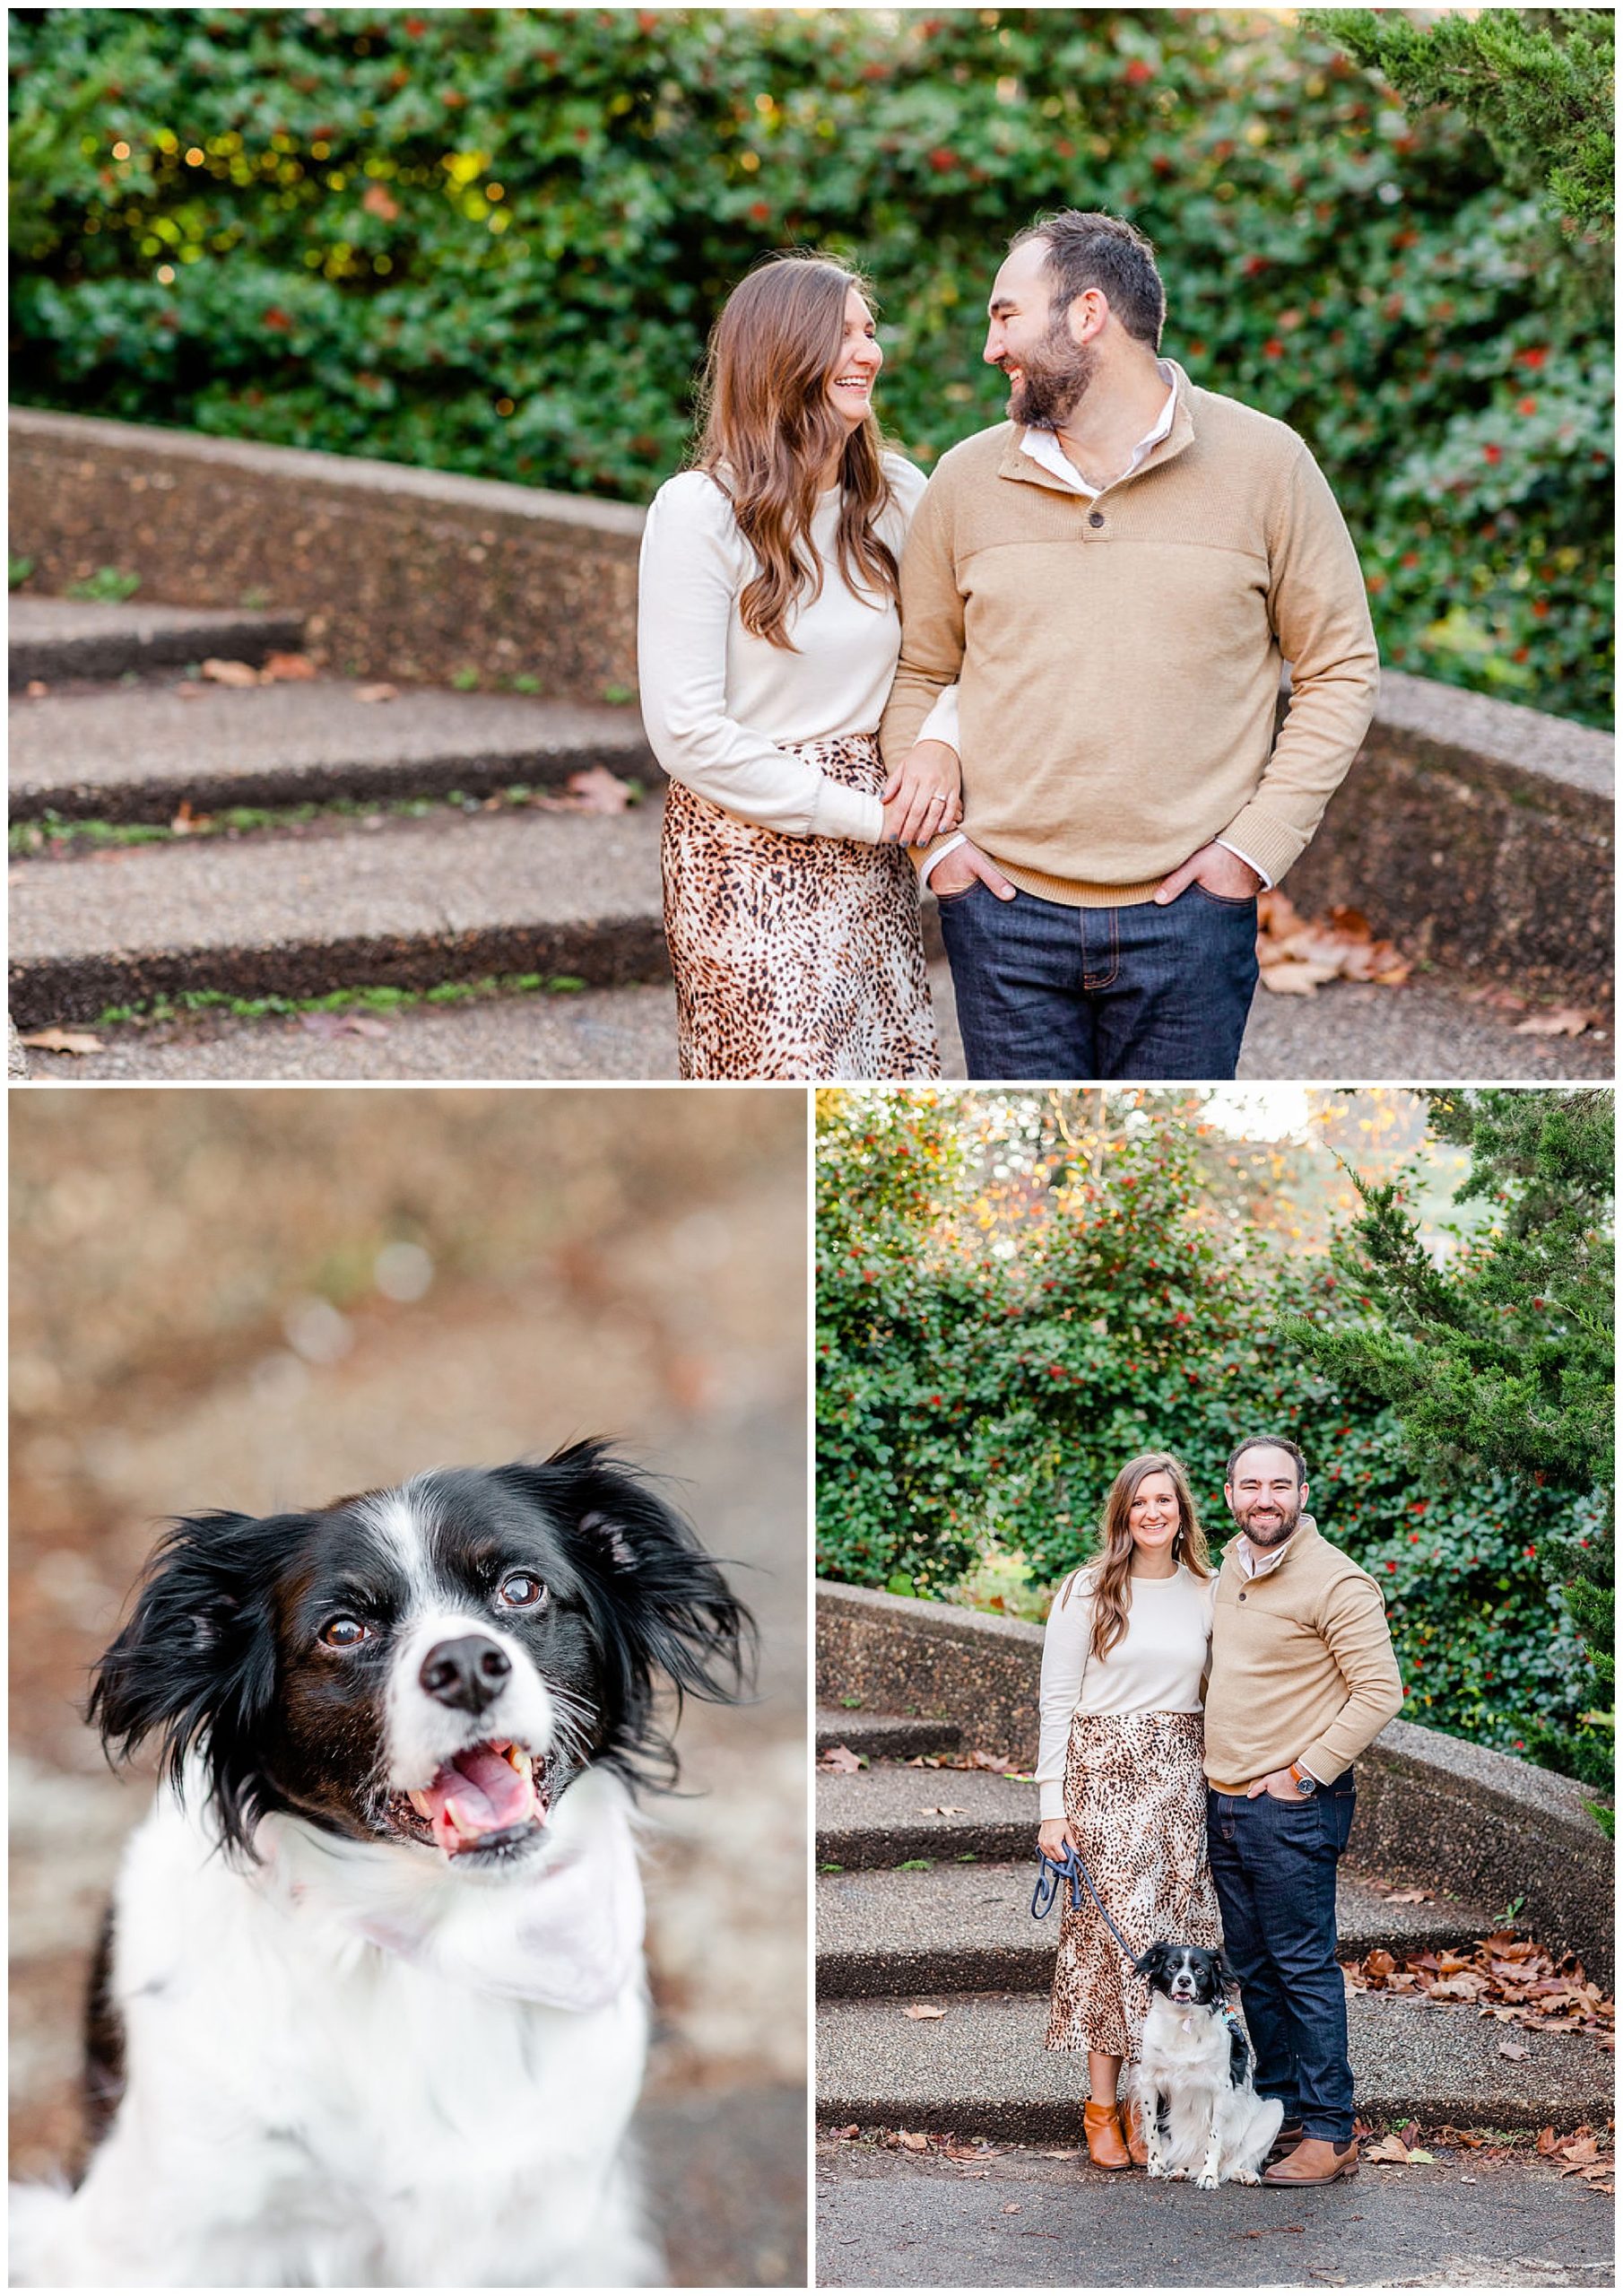 Meridian Hill Park engagement session, Meridian Hill Park DC, DC engagement photography, DC engagement photos, DC engagement session, DC engagement photographer, DC proposal photographer, DC wedding photographer, autumn engagement photos, Rachel E.H. Photography, couple smiling at each other, dog panting, cheetah print maxi skirt